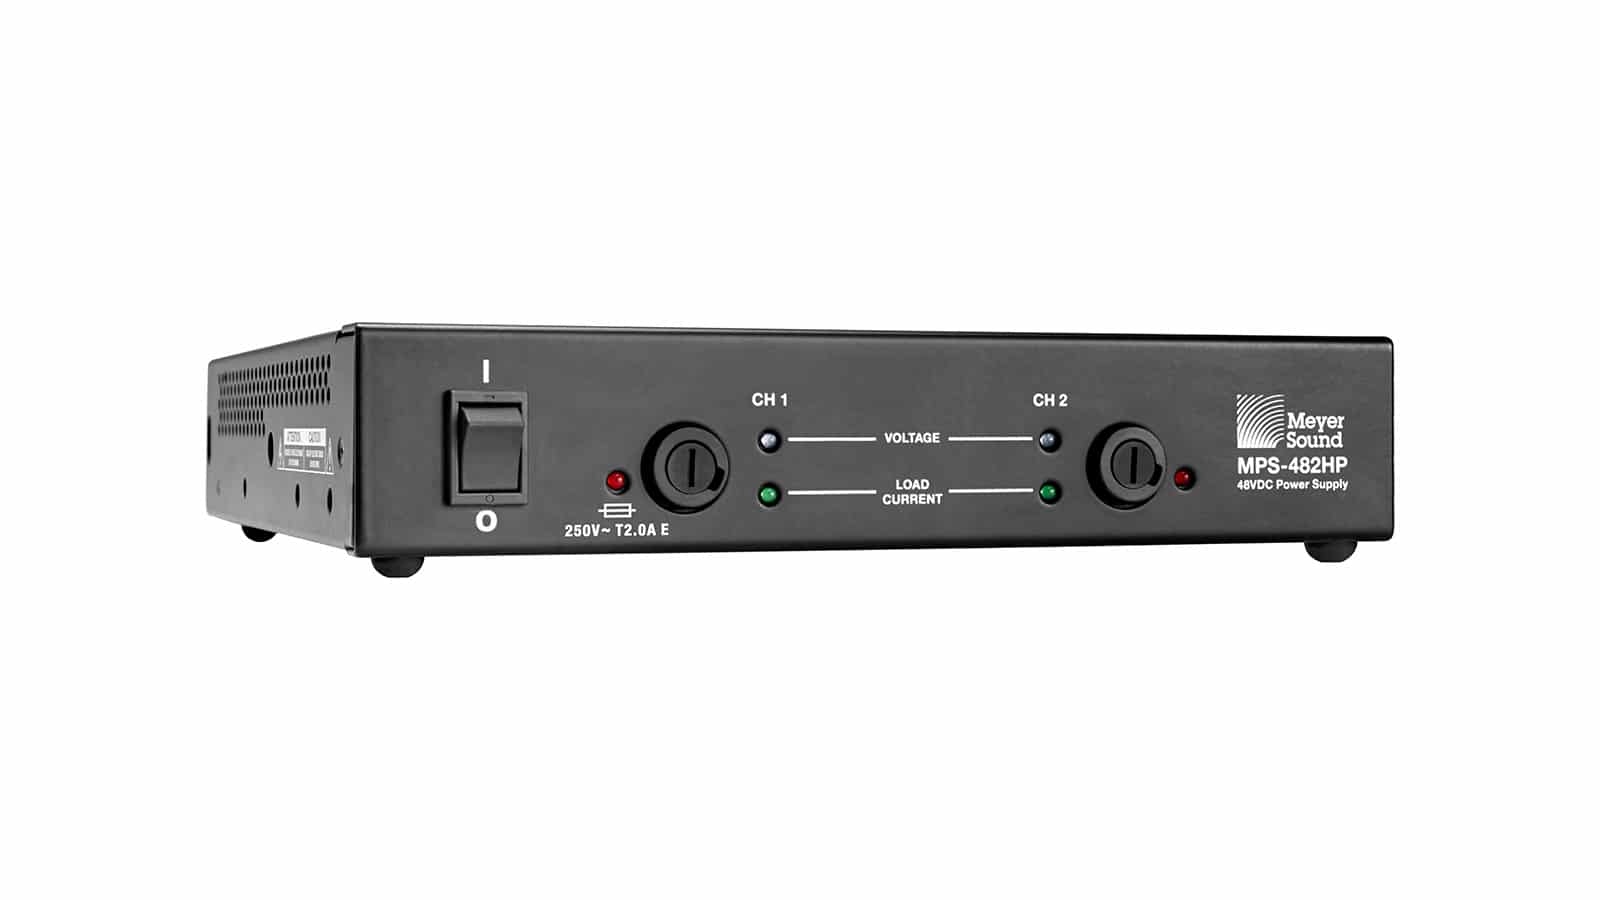 Meyer Sound Extends the Flexibility of IntelligentDC Systems with New MPS-482HP Power Supply